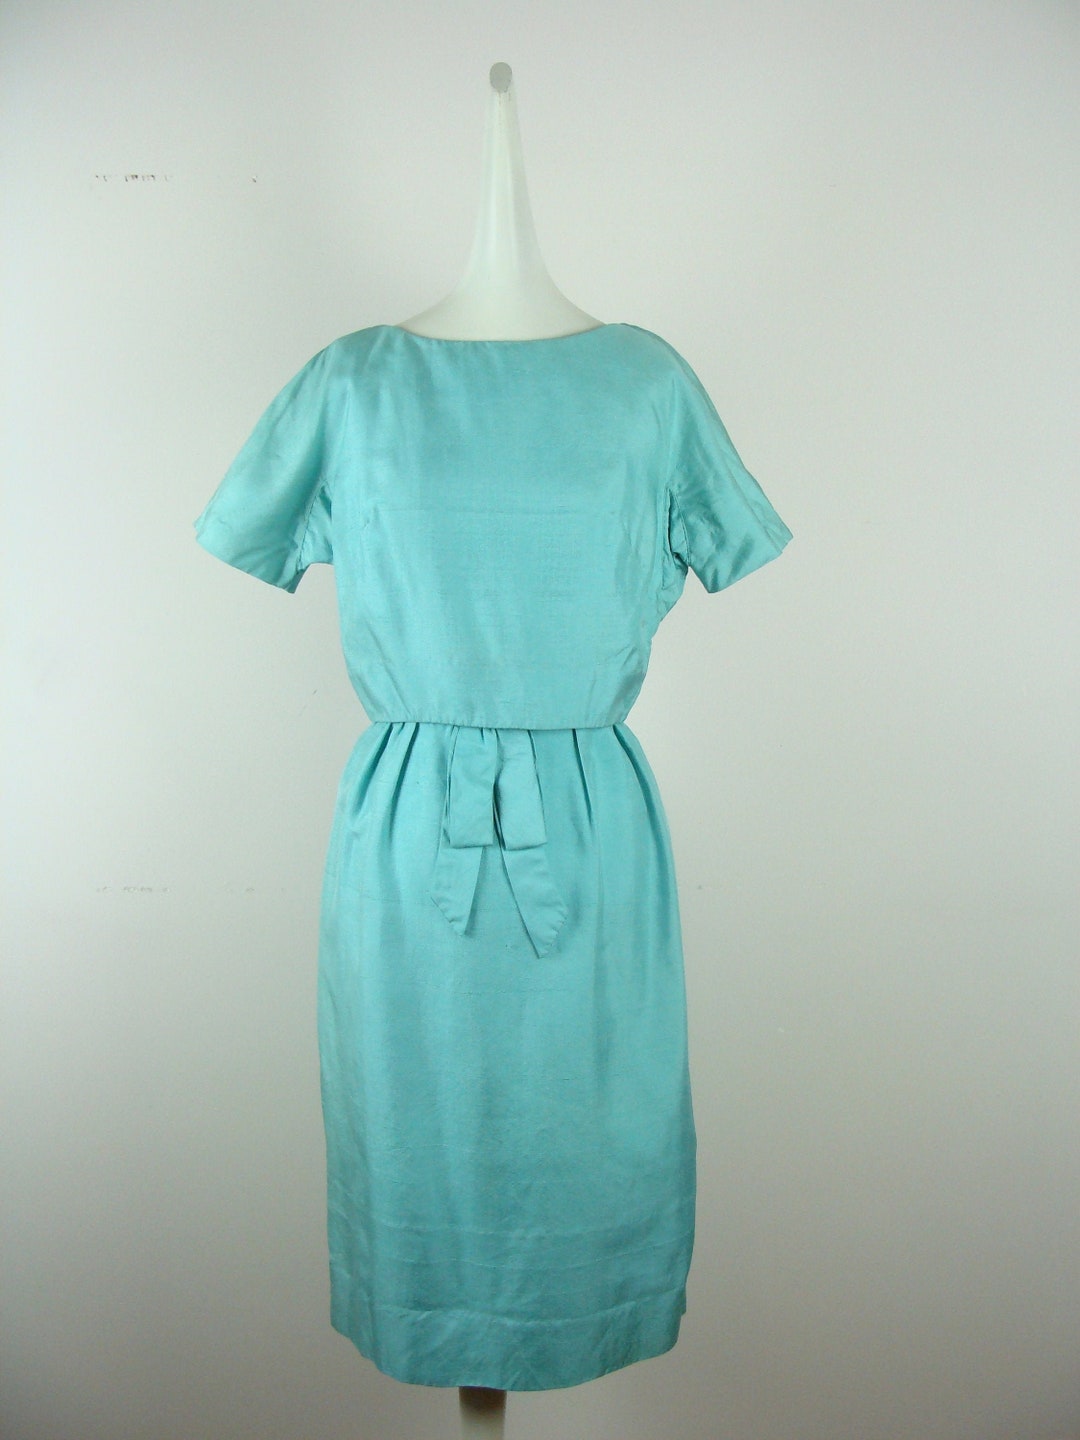 Vintage Sheath Dress 50s Classic Chic Mad Men Style Pin up - Etsy